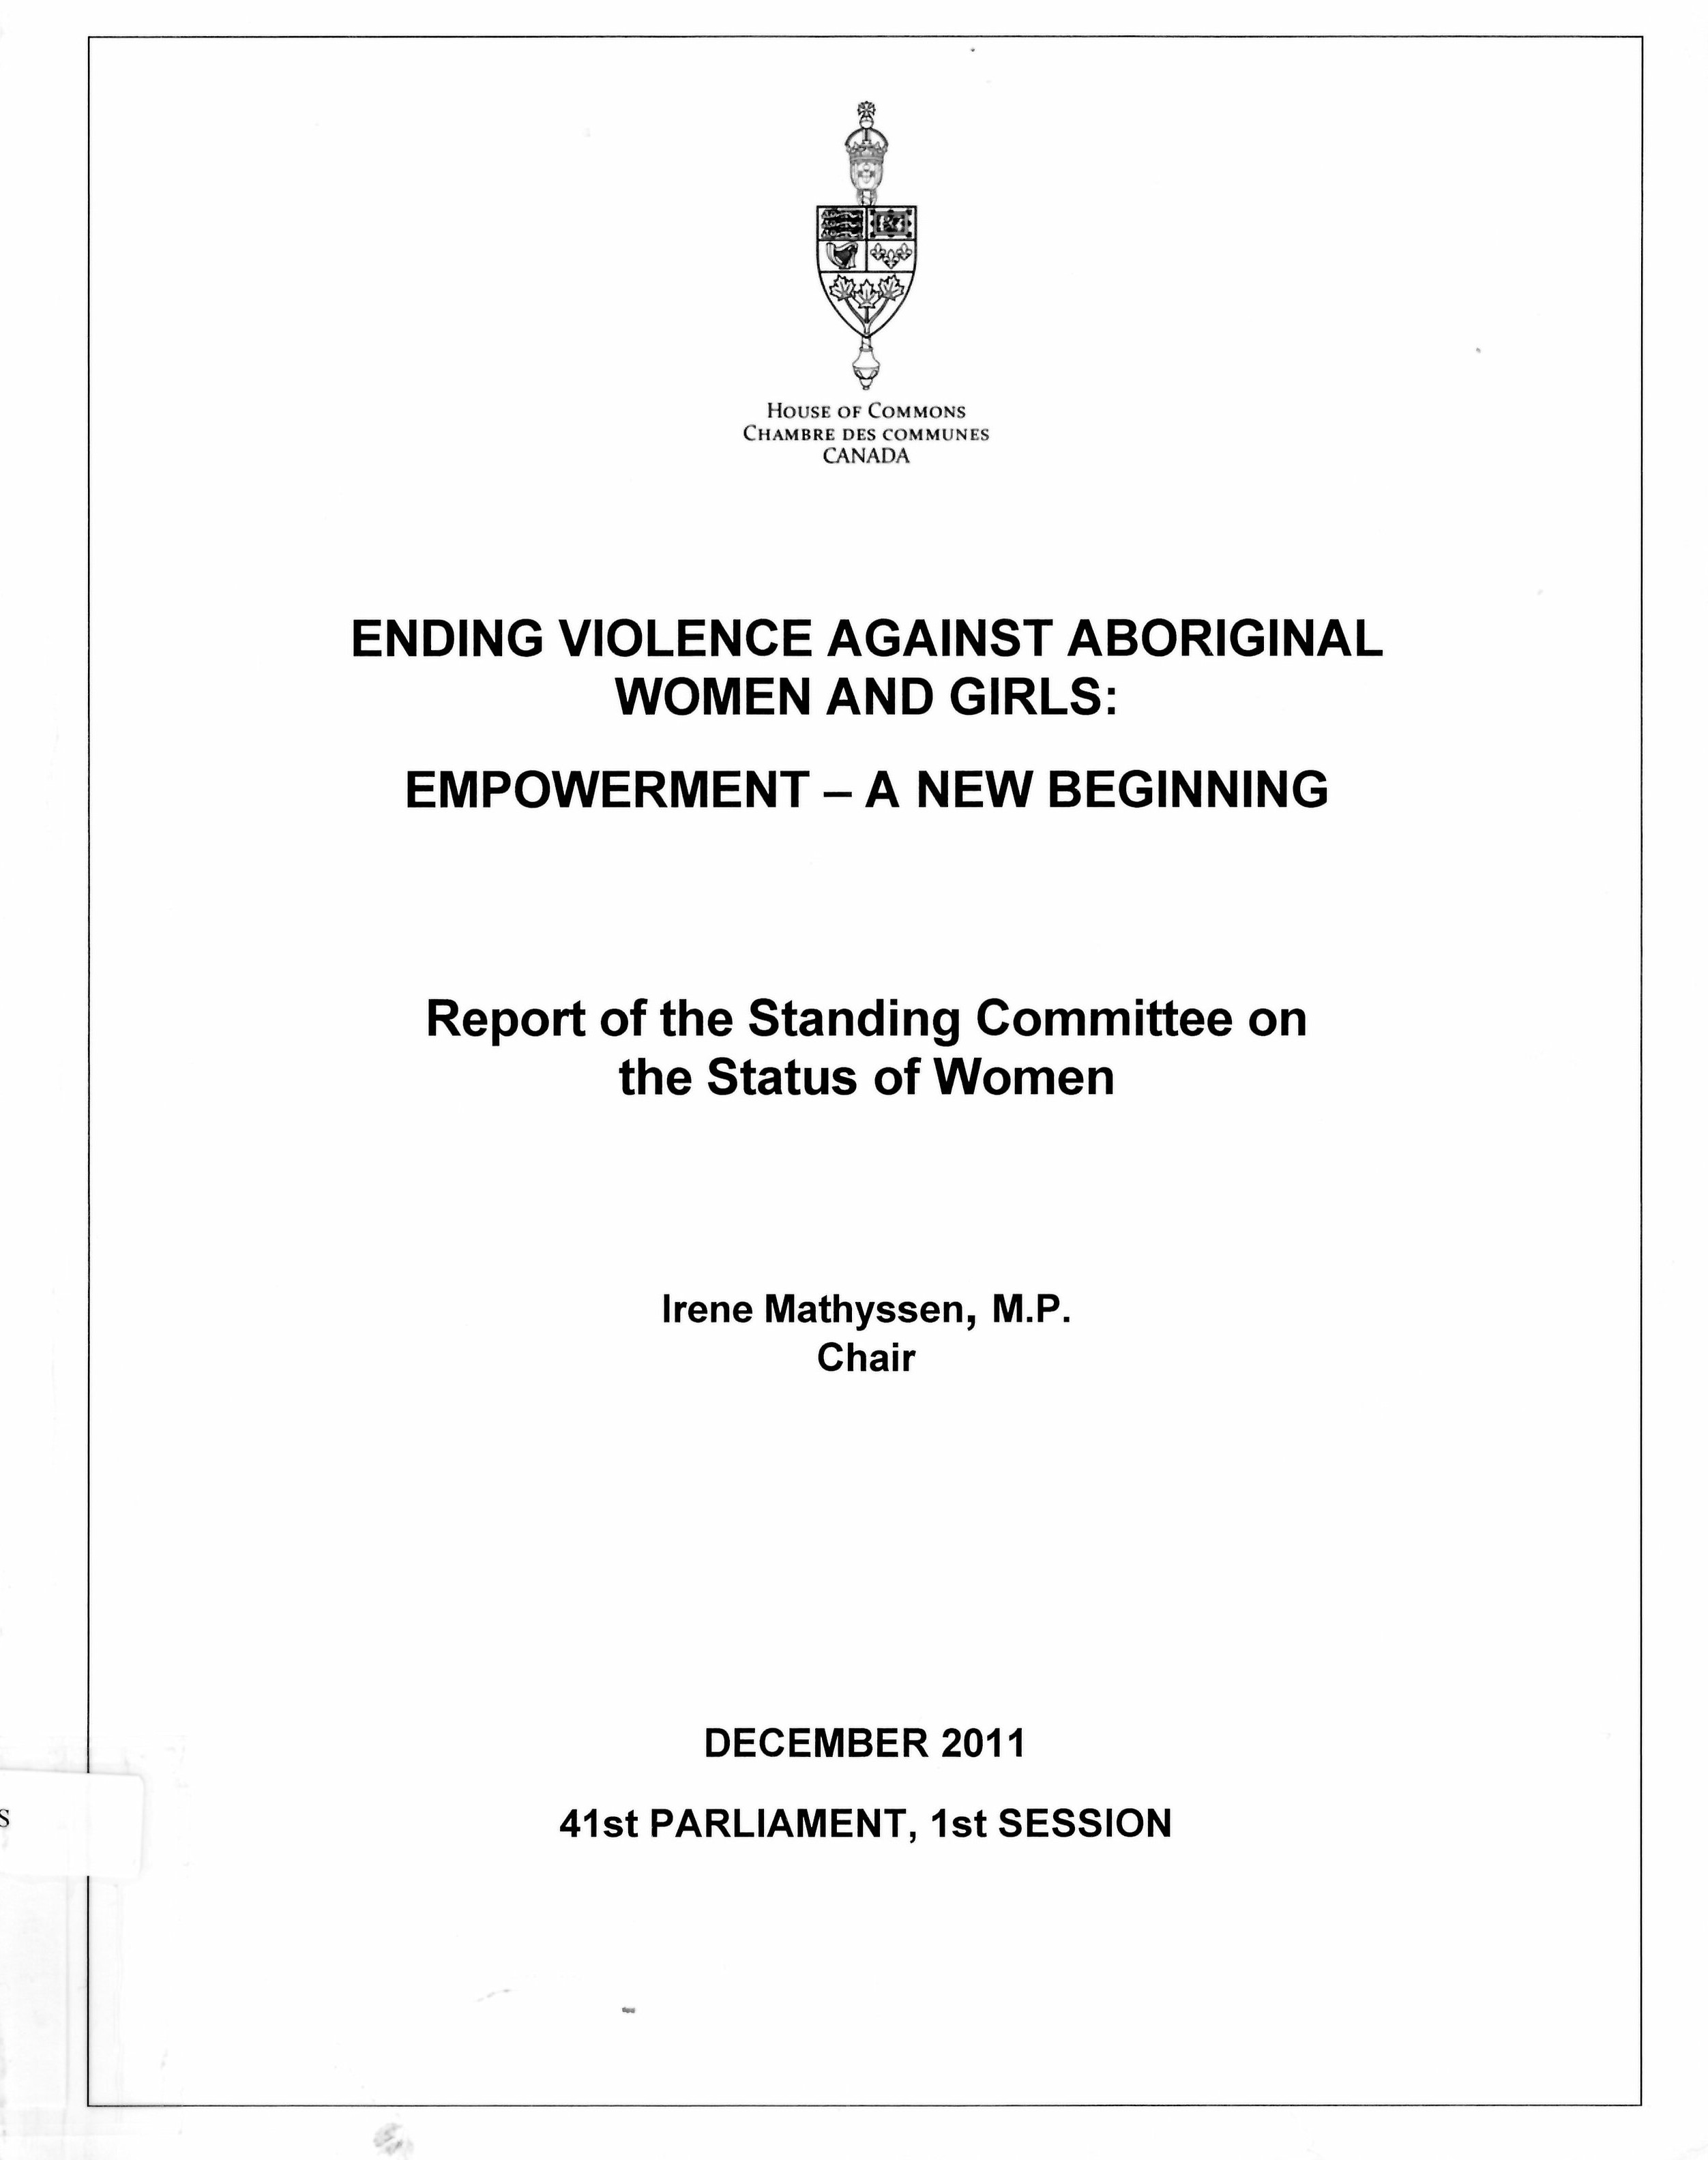 Ending violence against Aboriginal women and girls : empowerment : a new beginning : report of the Standing Committee on the Status of Women